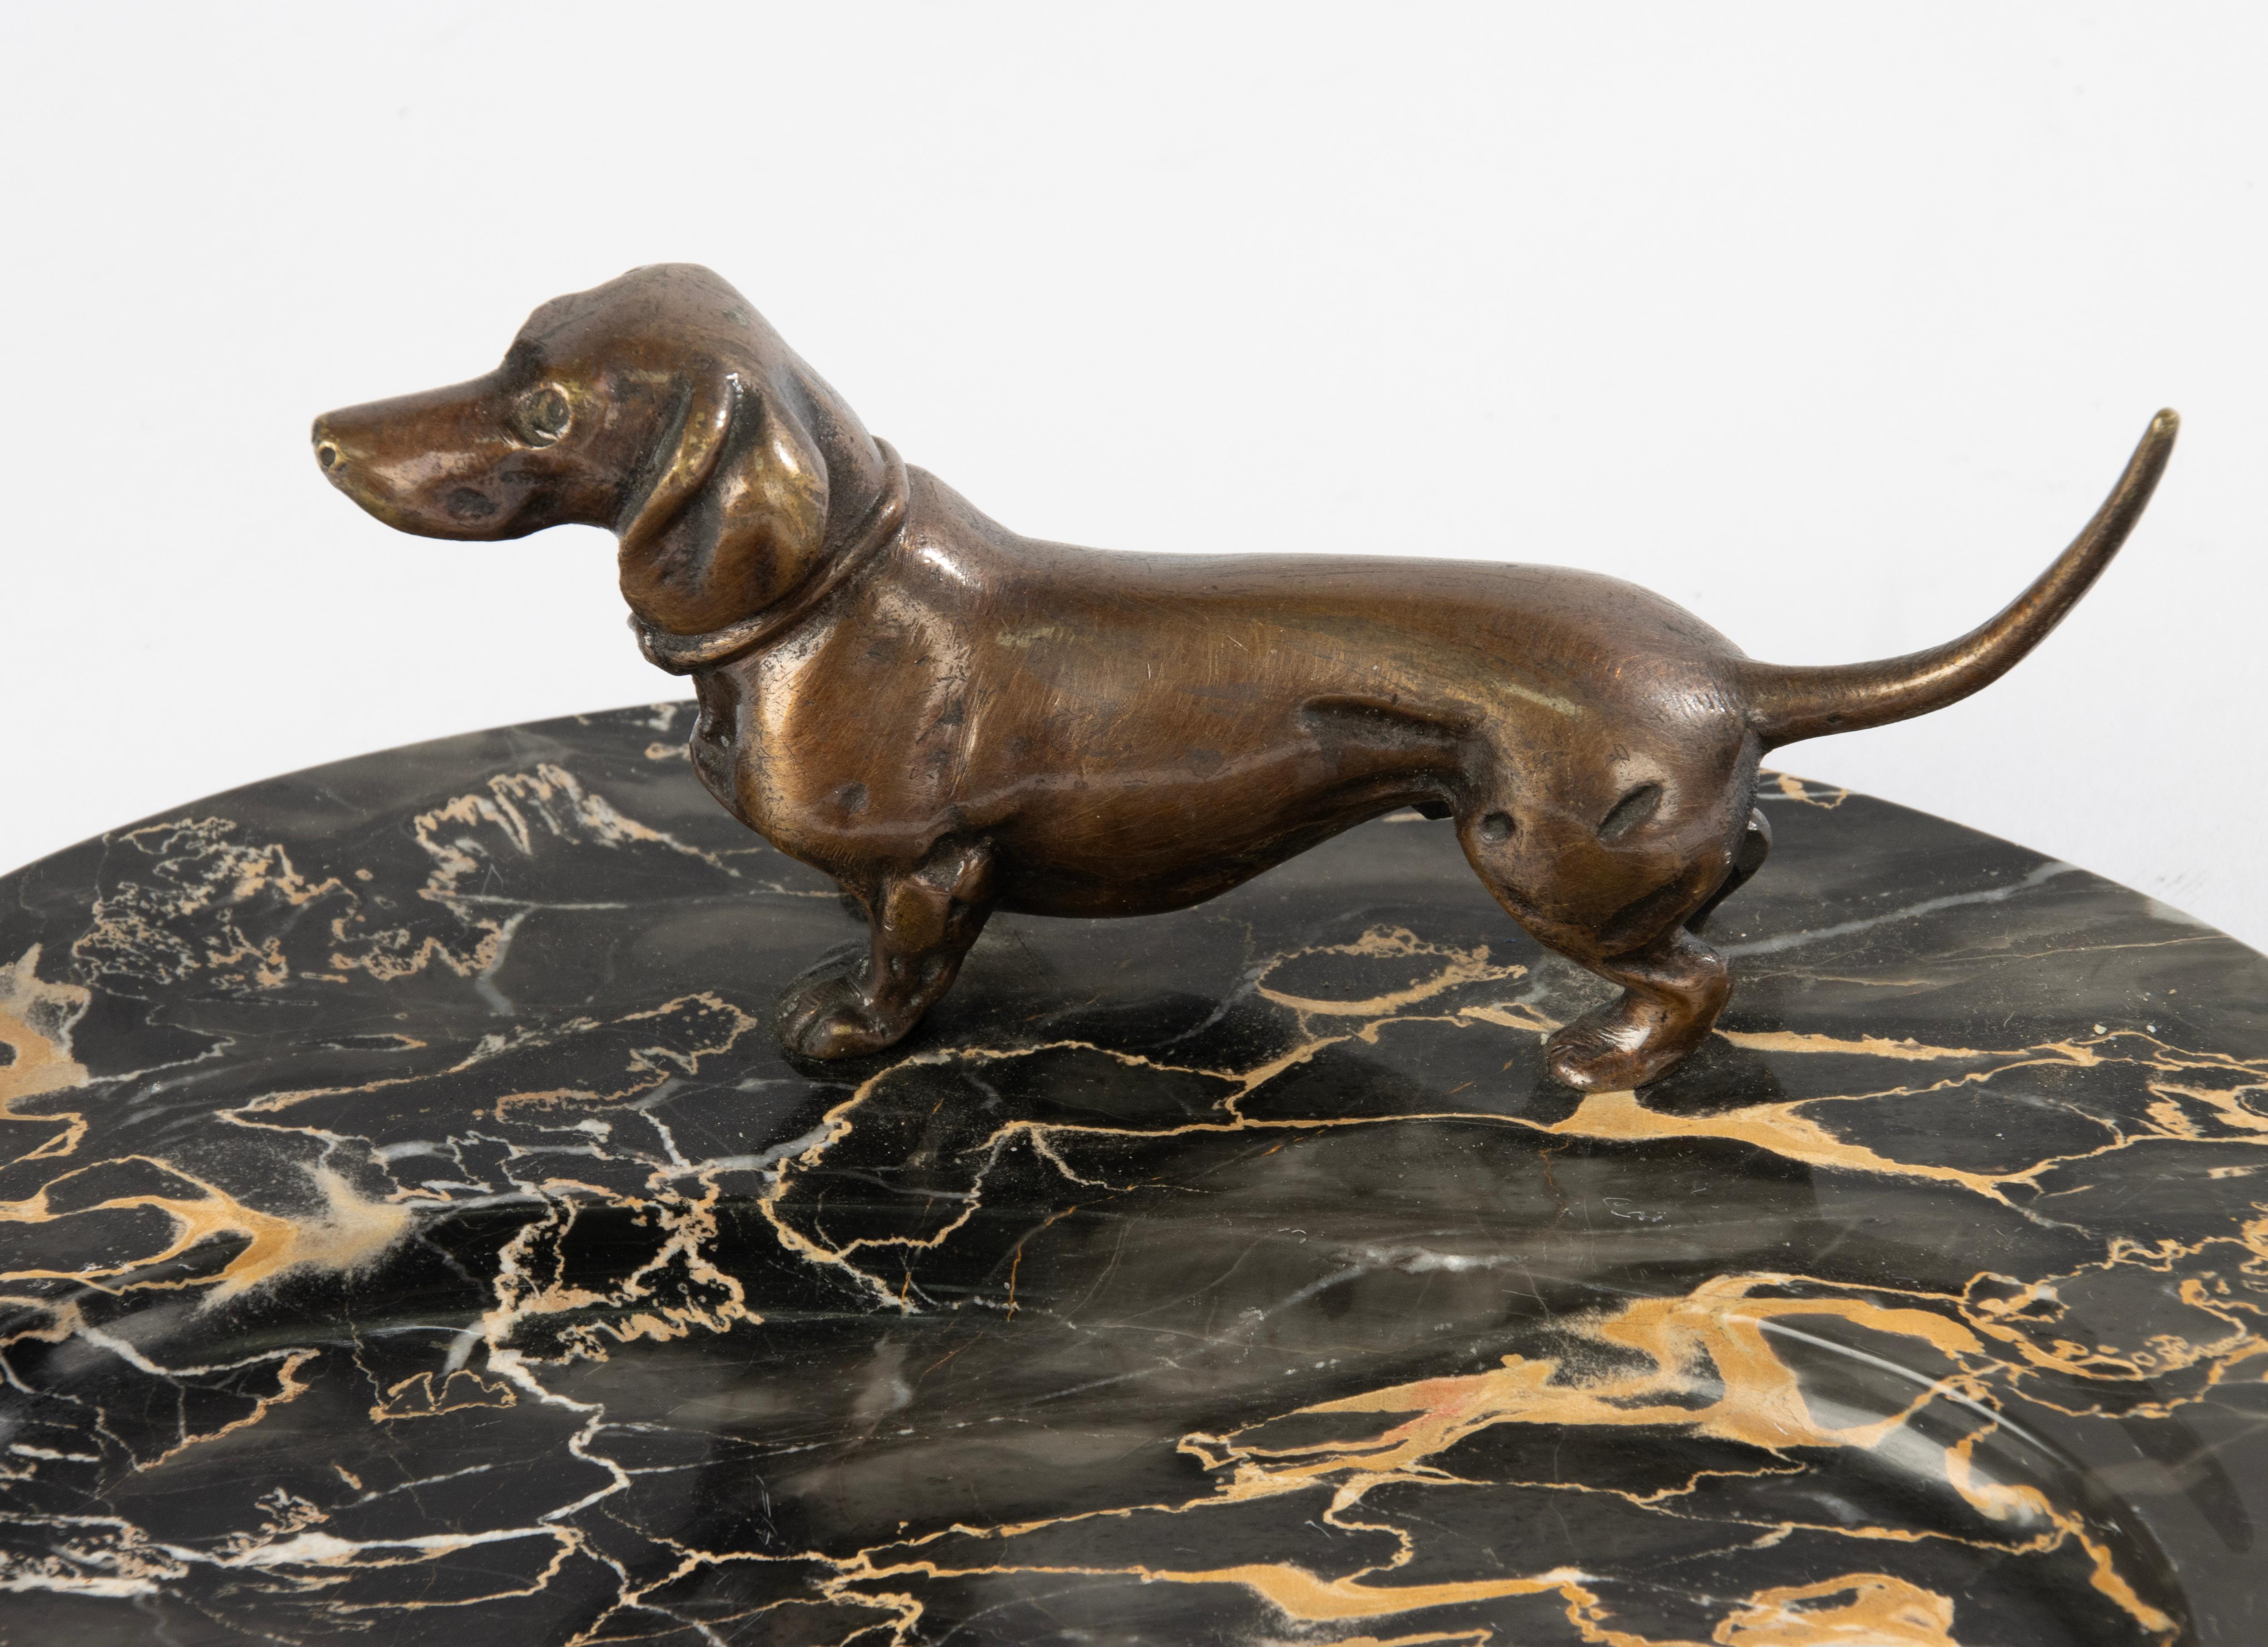 A lovely bowl / vide-poche, made of marble with a bronze Dachshund. 
Made in France, around 1920-1930. 
The bowl is in good condition. Beautiful patina. 

Dimensions: 22,5 x 17 cm and 8 cm tall. 
Free shipping worldwide

